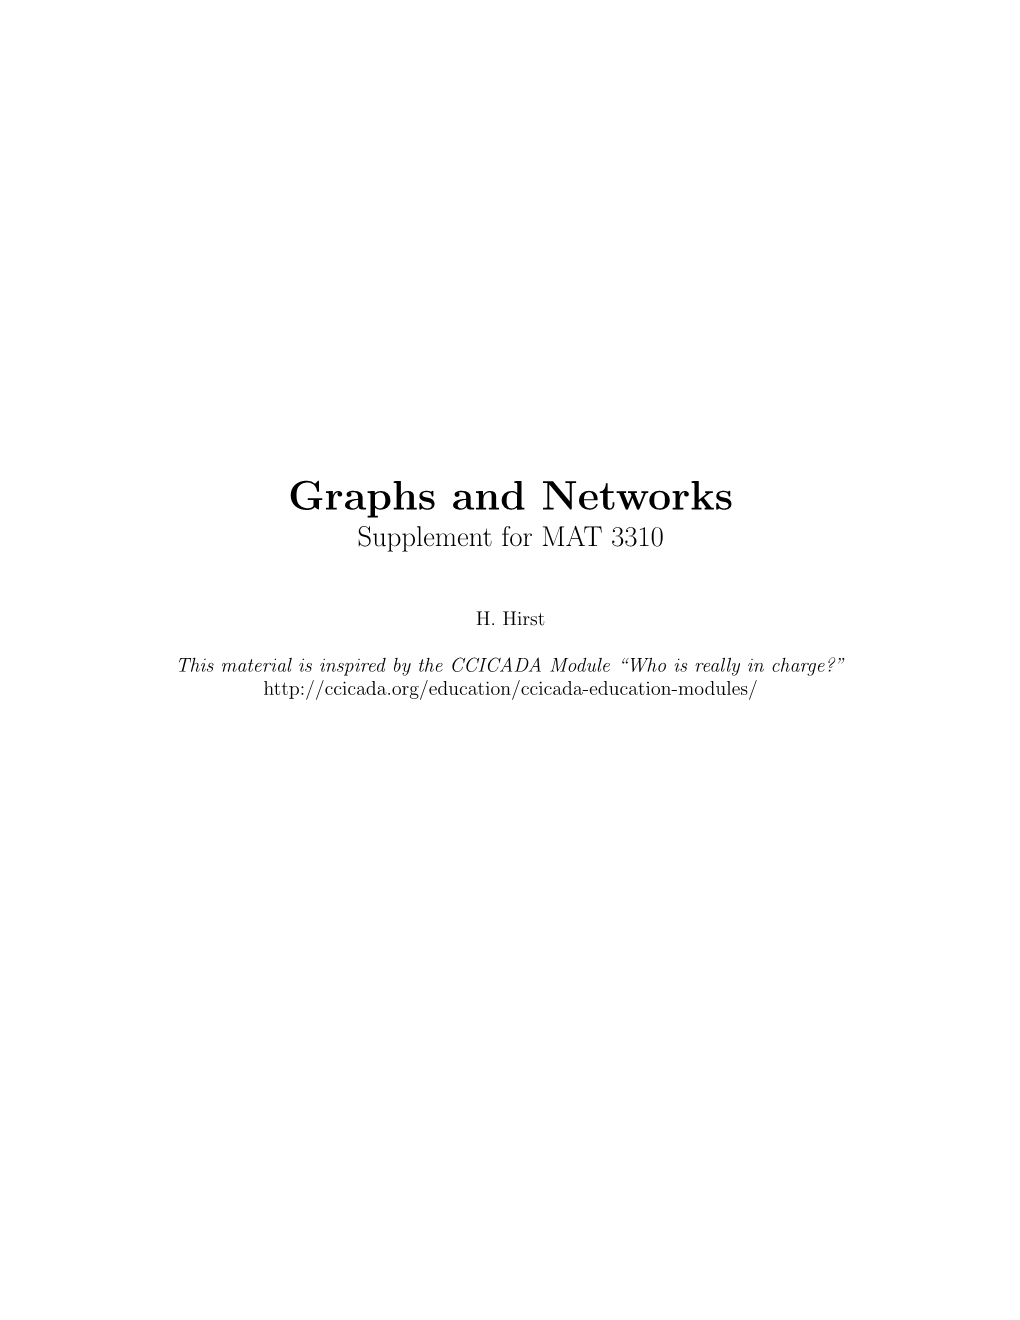 Graphs and Networks Supplement for MAT 3310